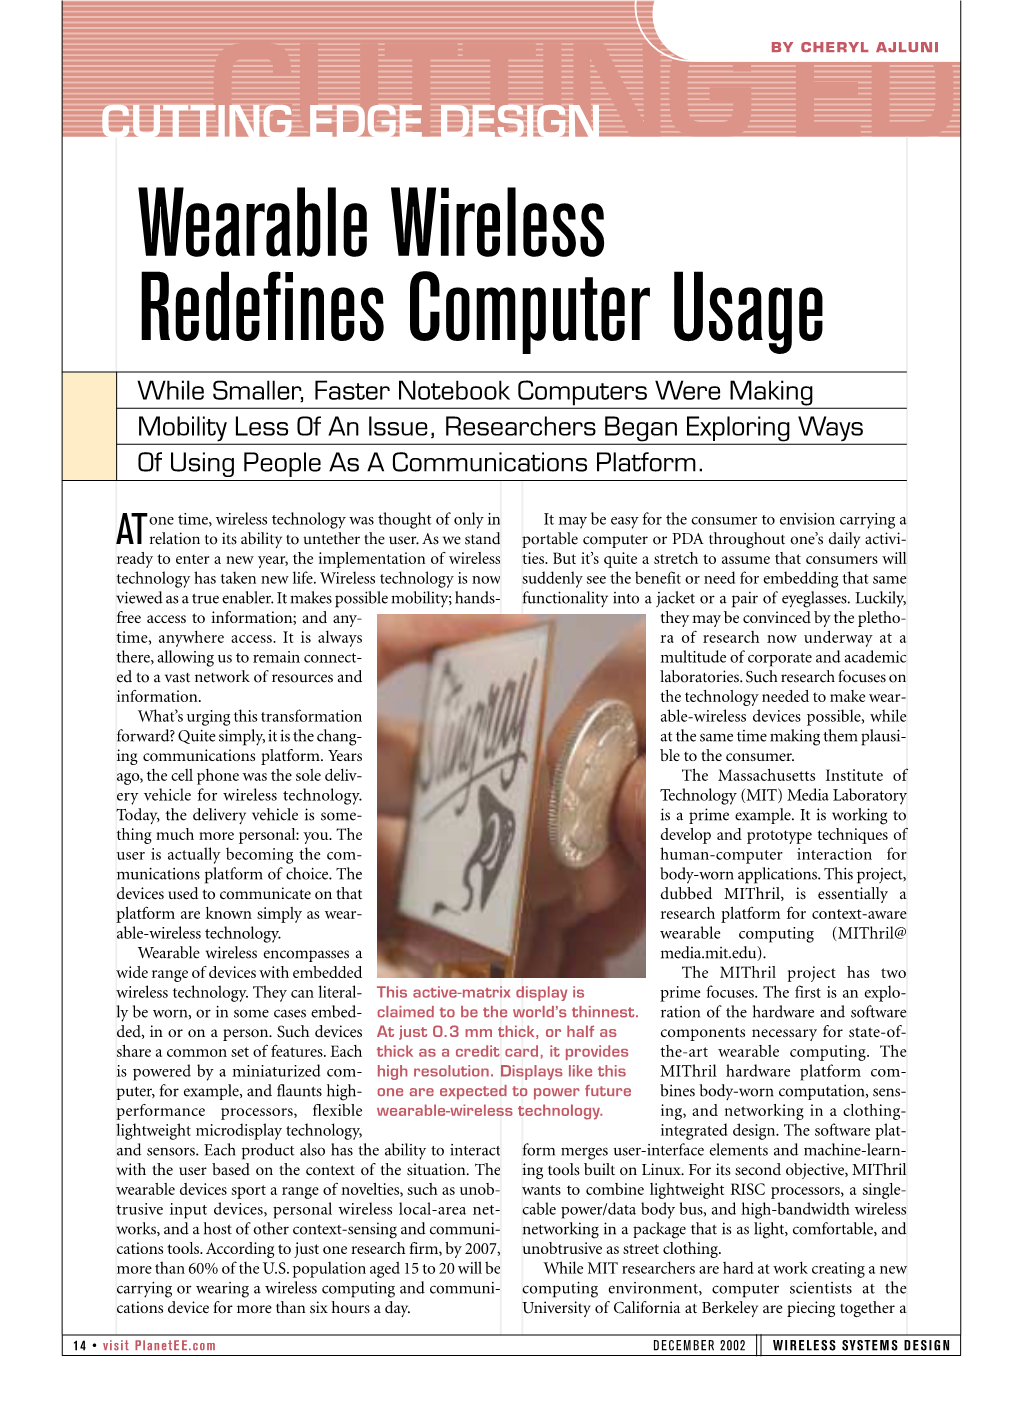 Wearable Wireless Redefines Computer Usage